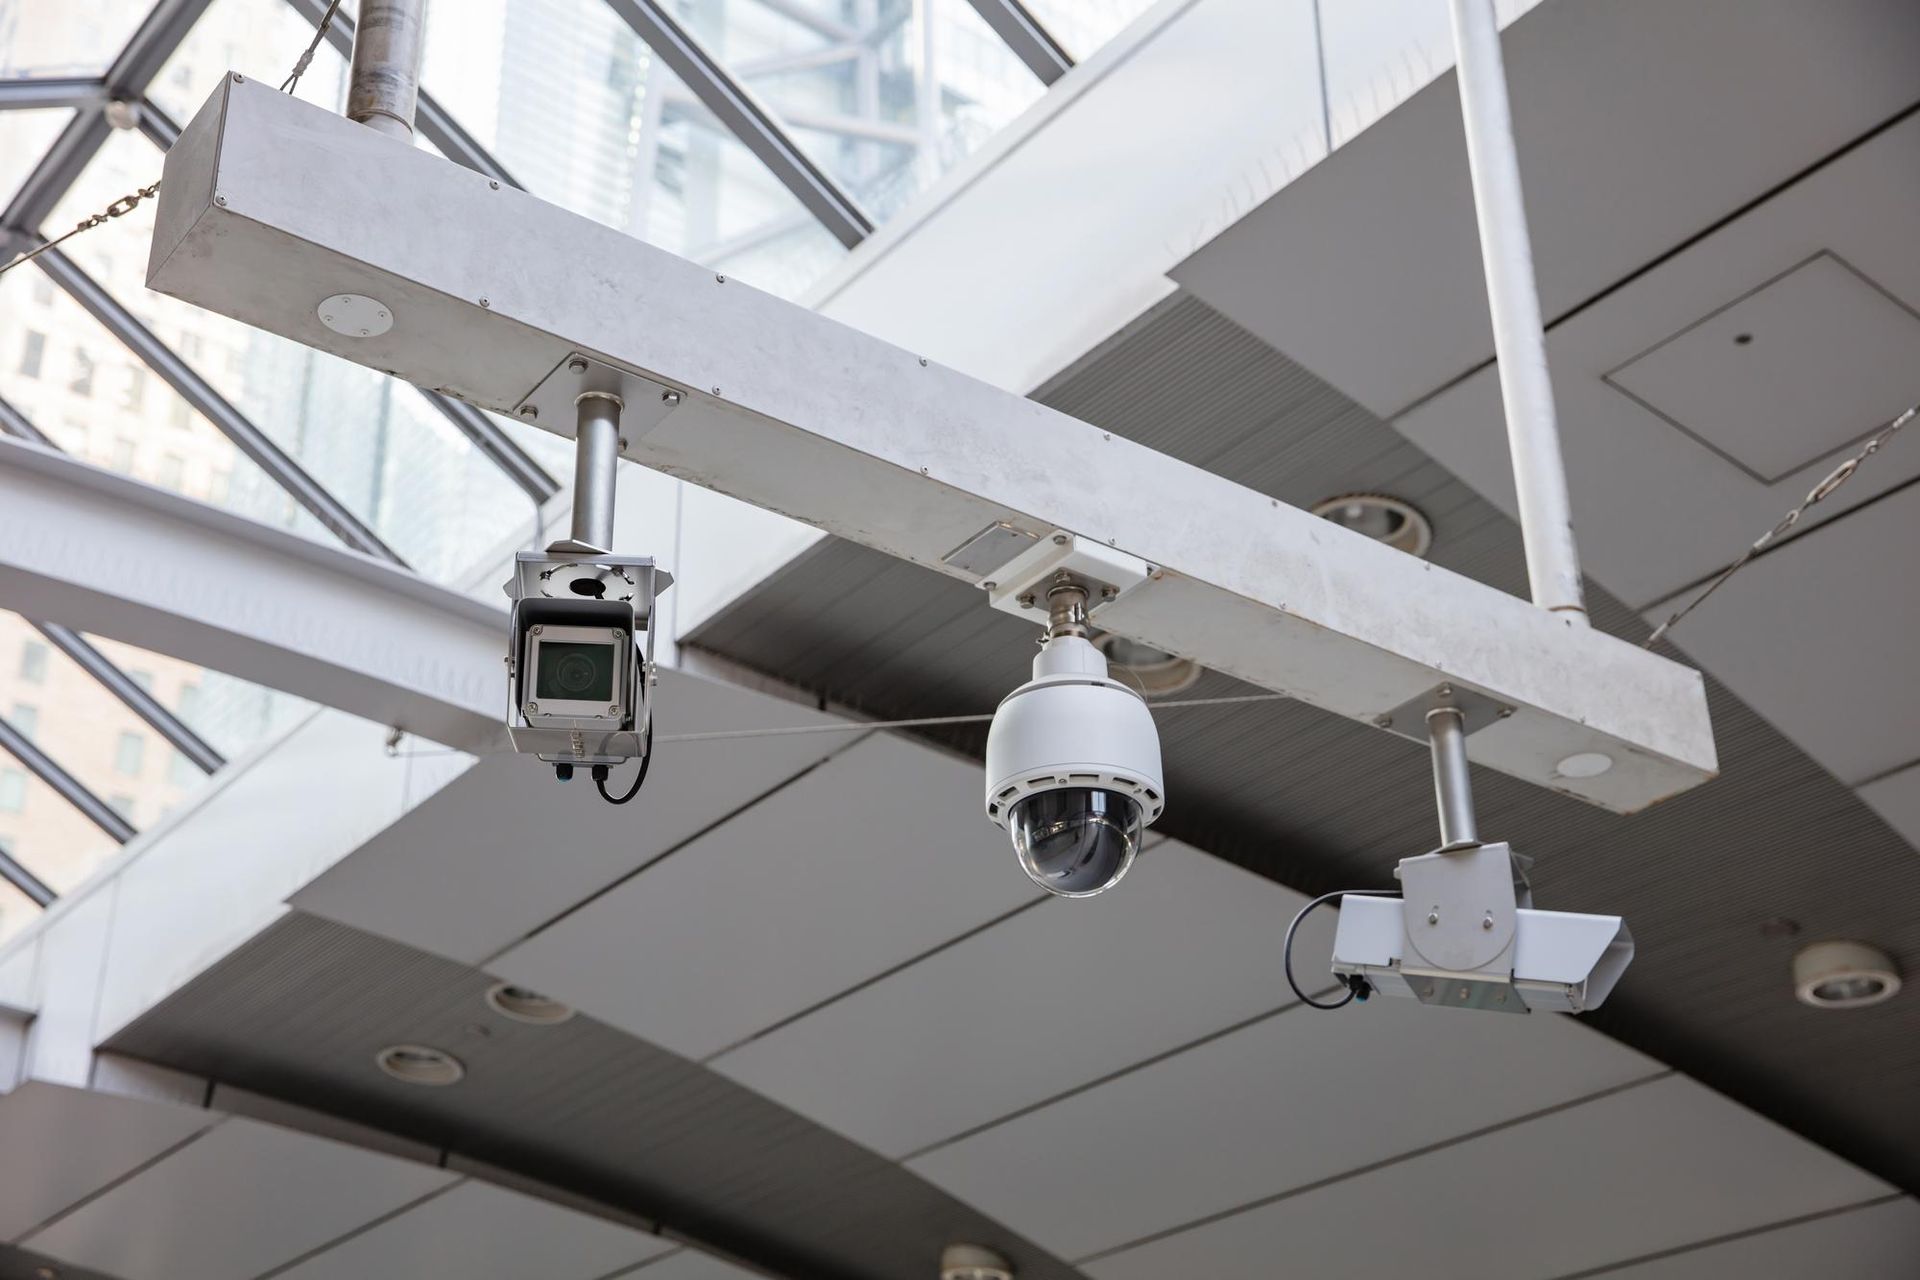 two security cameras are hanging from the ceiling of a building .